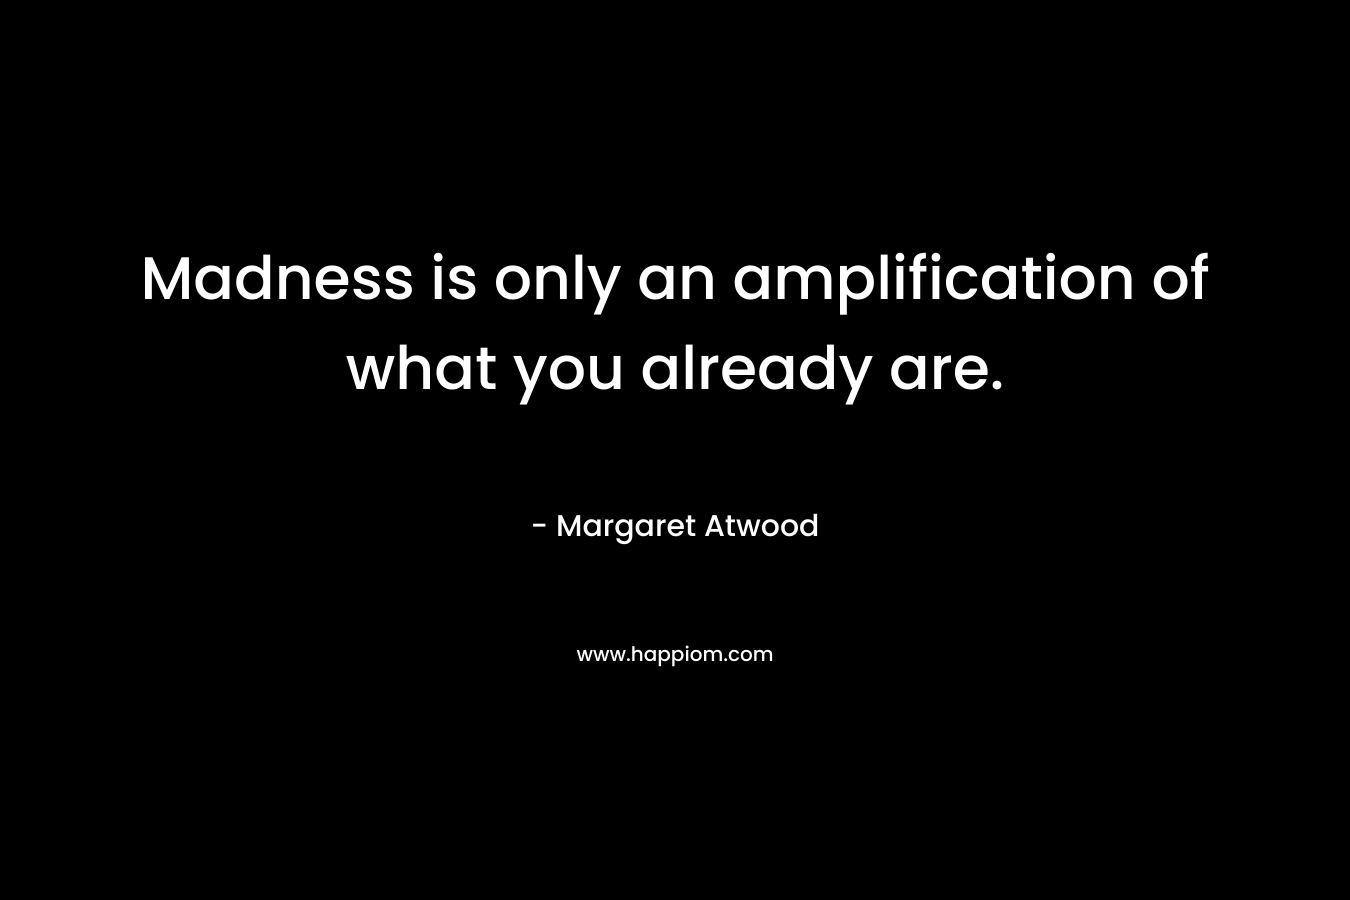 Madness is only an amplification of what you already are. – Margaret Atwood